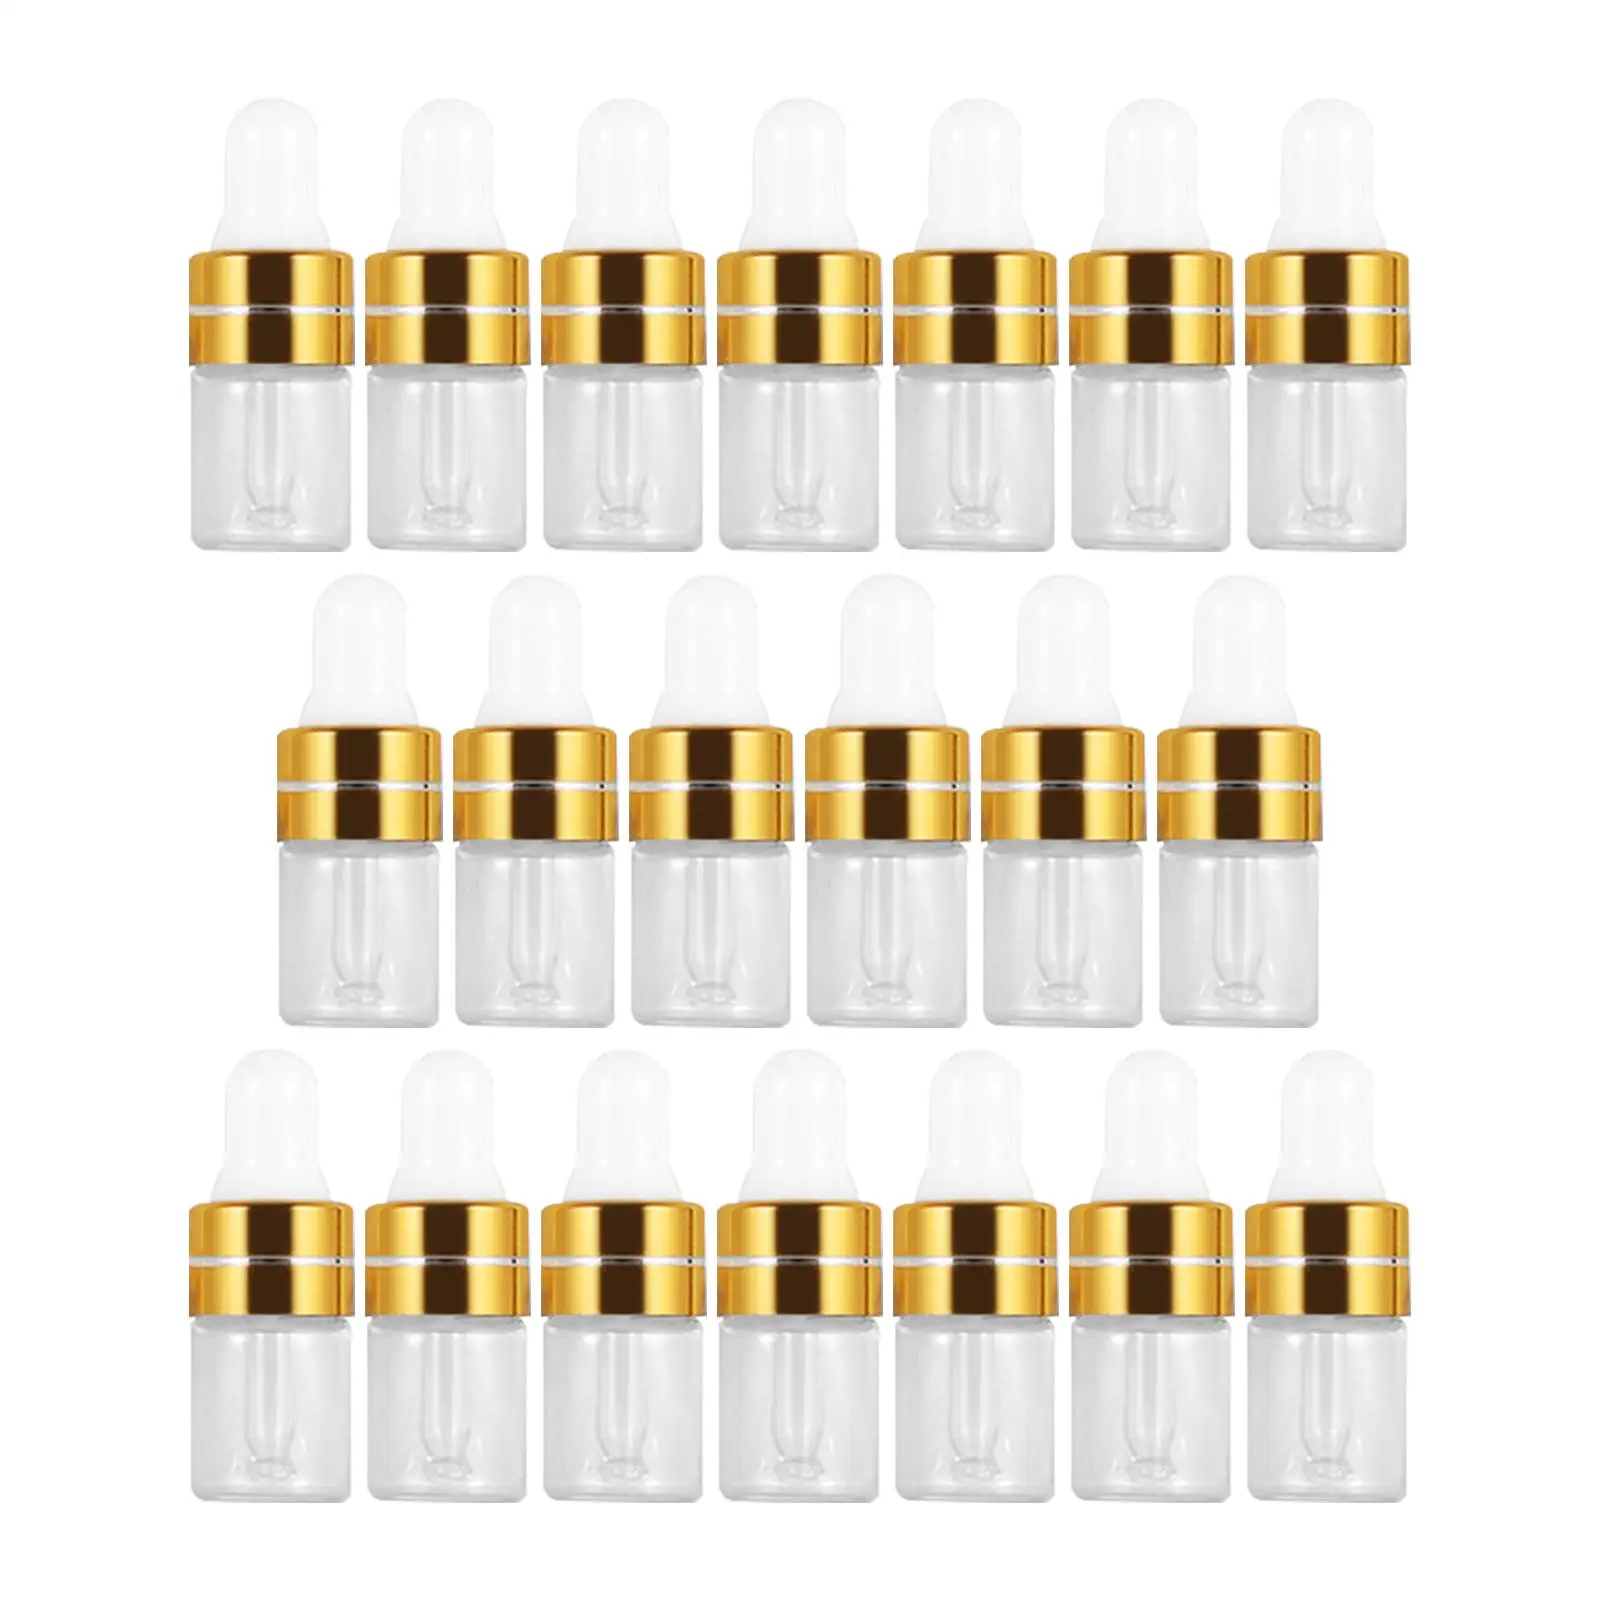 20Pcs Empty Glass Dropper Bottles Refillable Containers for Liquid Extract